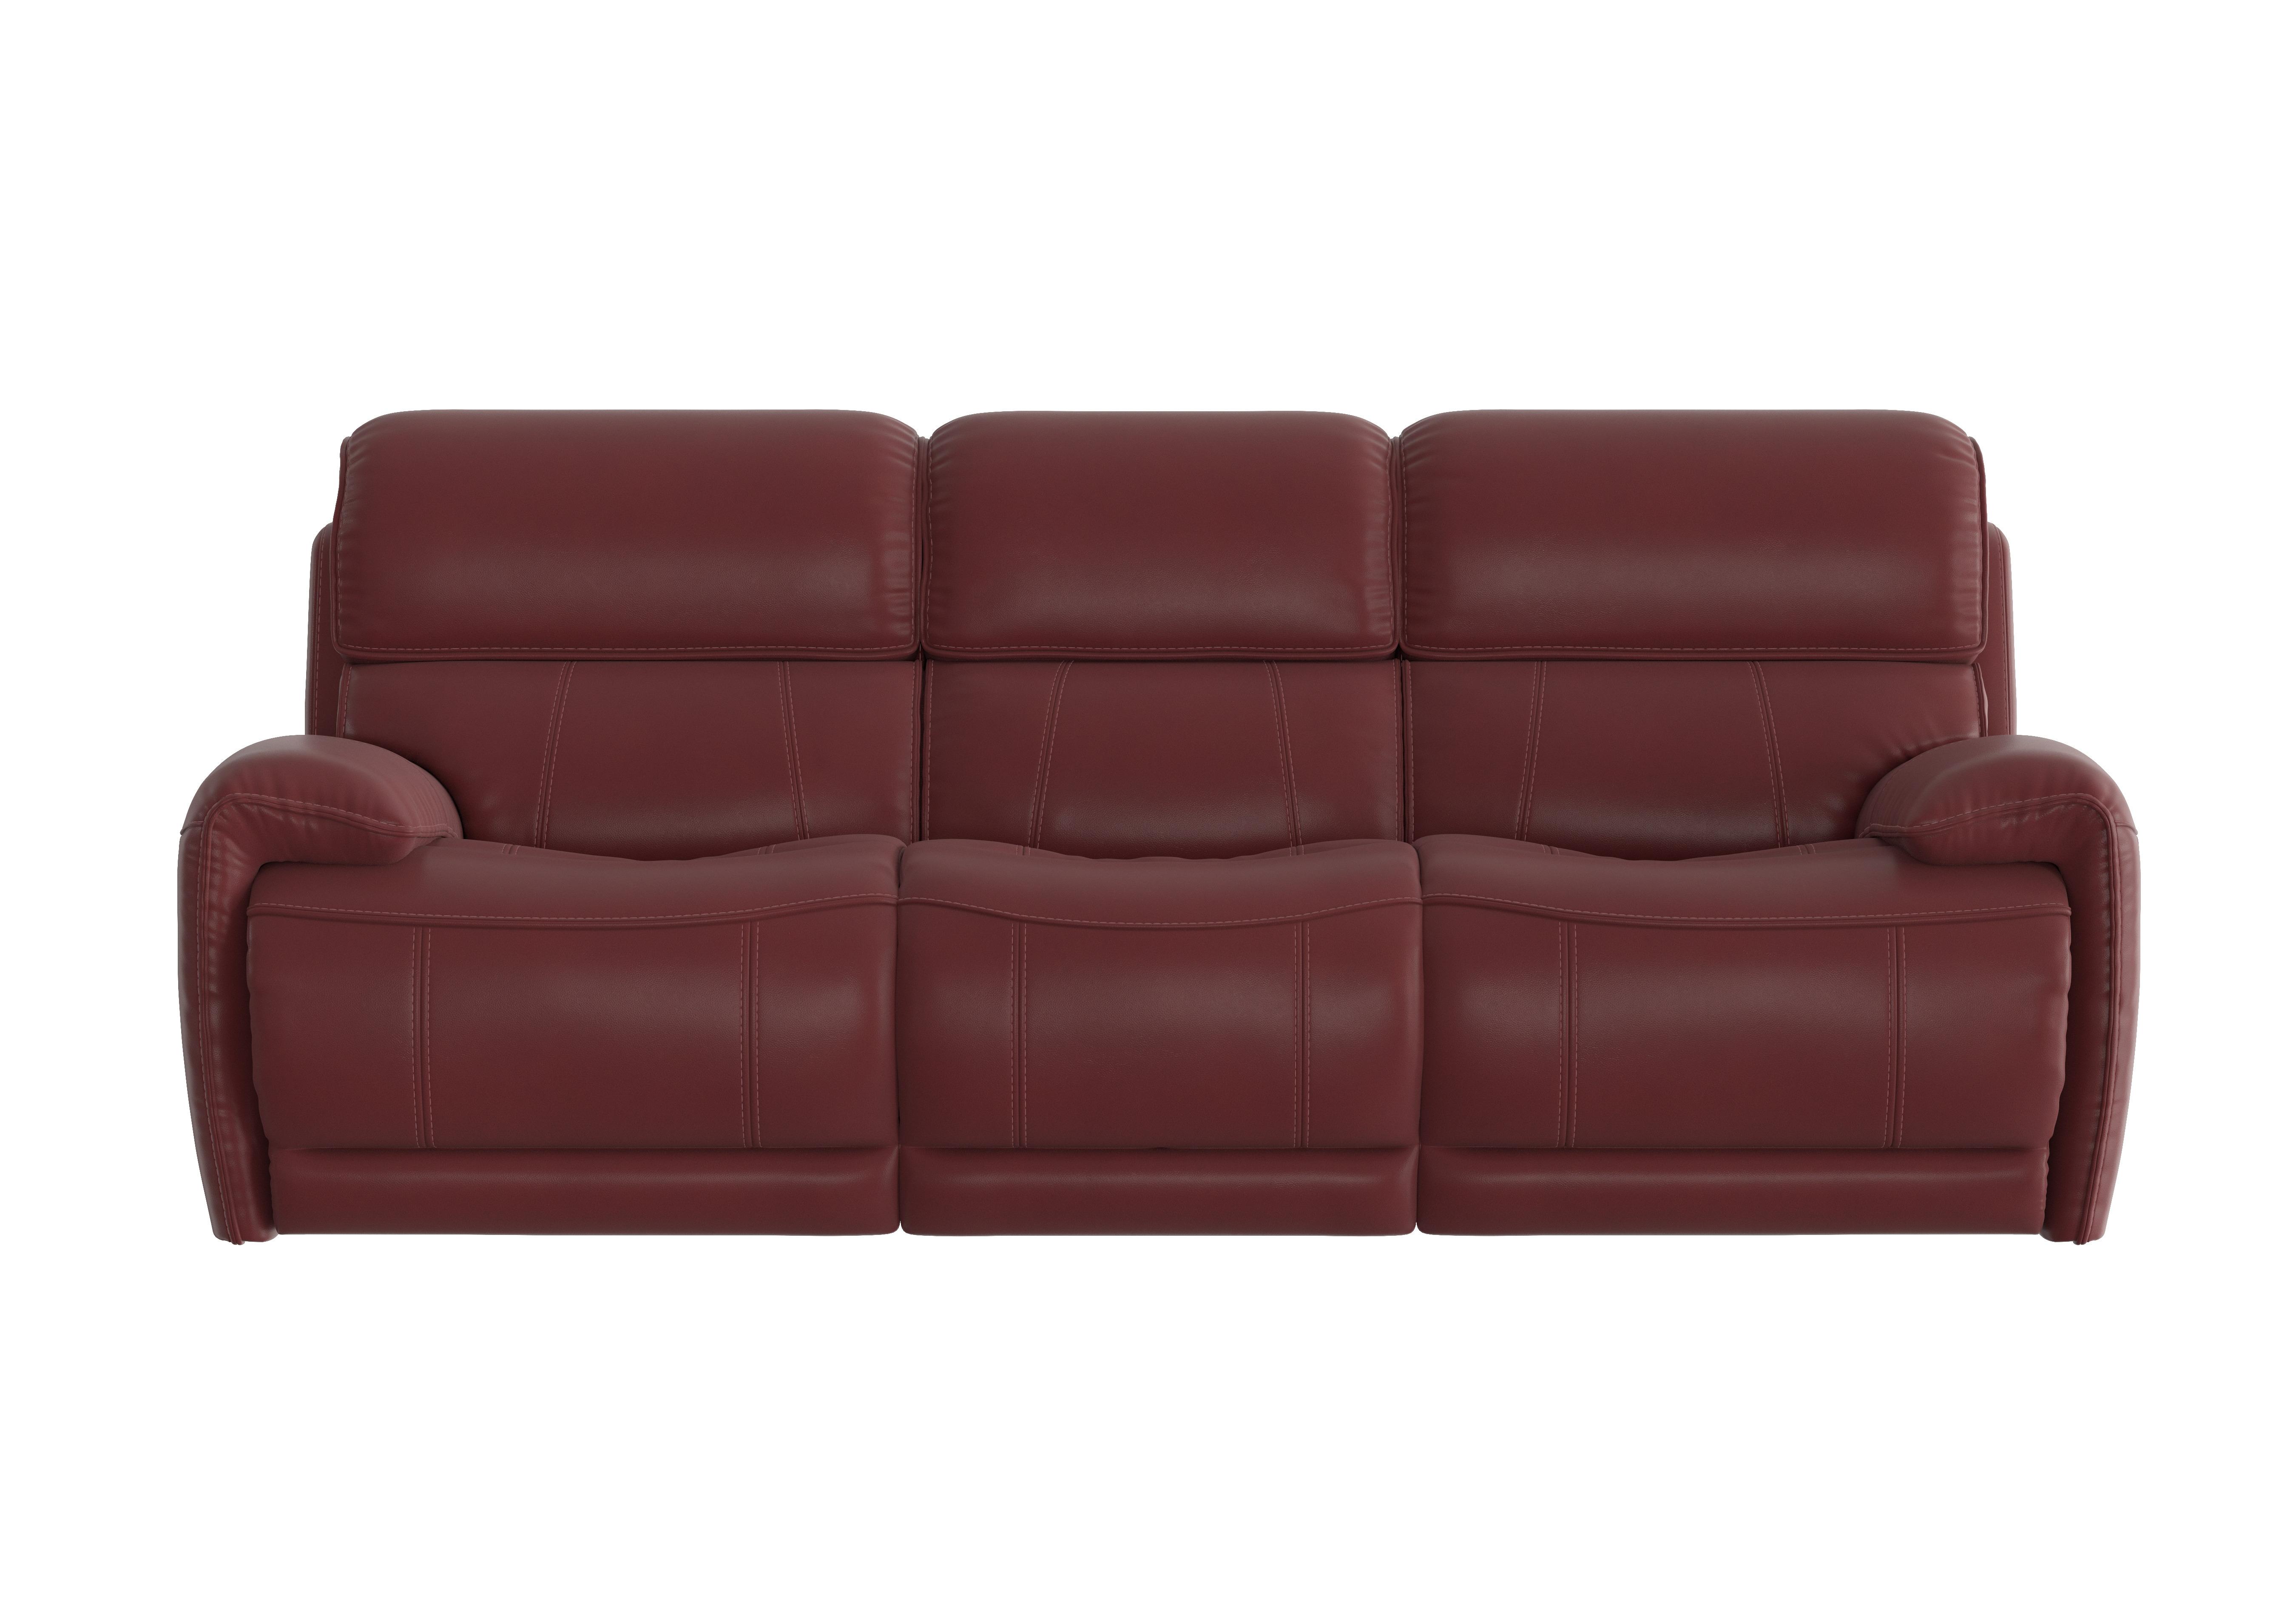 Link 3 Seater Leather Power Recliner Sofa with Power Headrests in Bv-035c Deep Red on Furniture Village